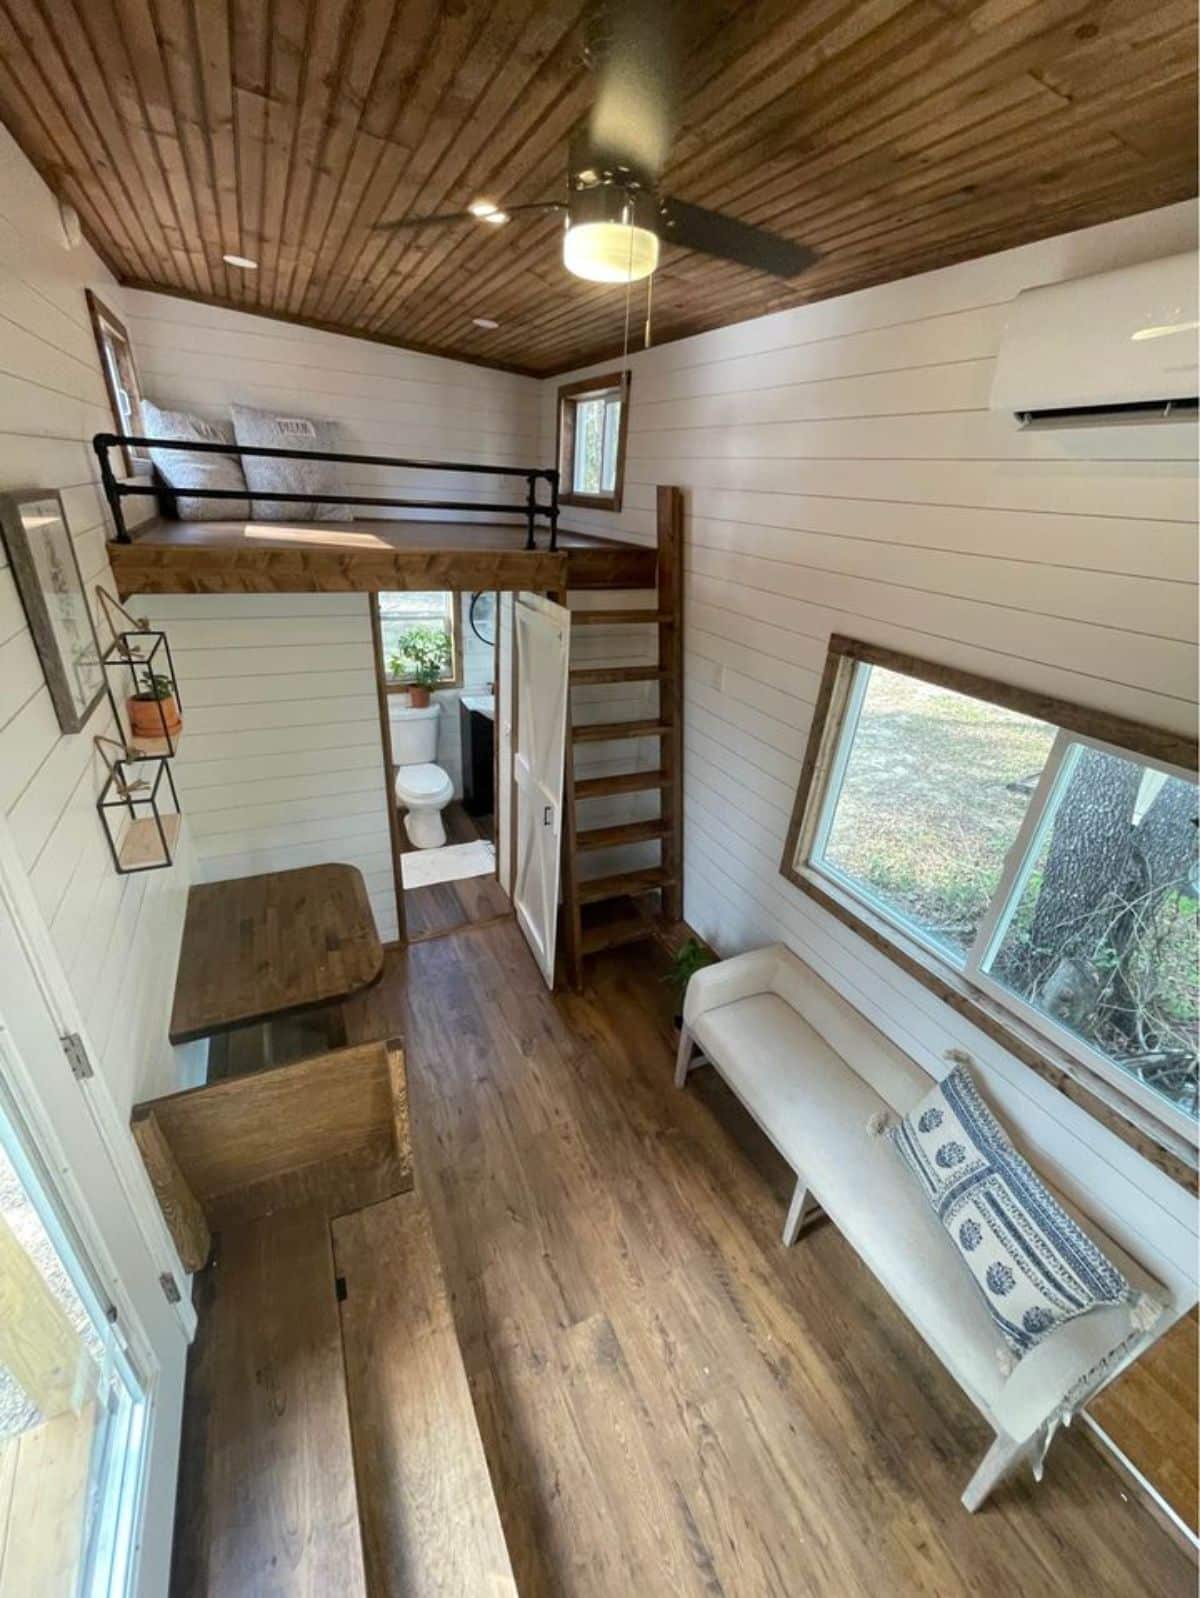 Ariel view of interiors of 24’ tiny house on wheels